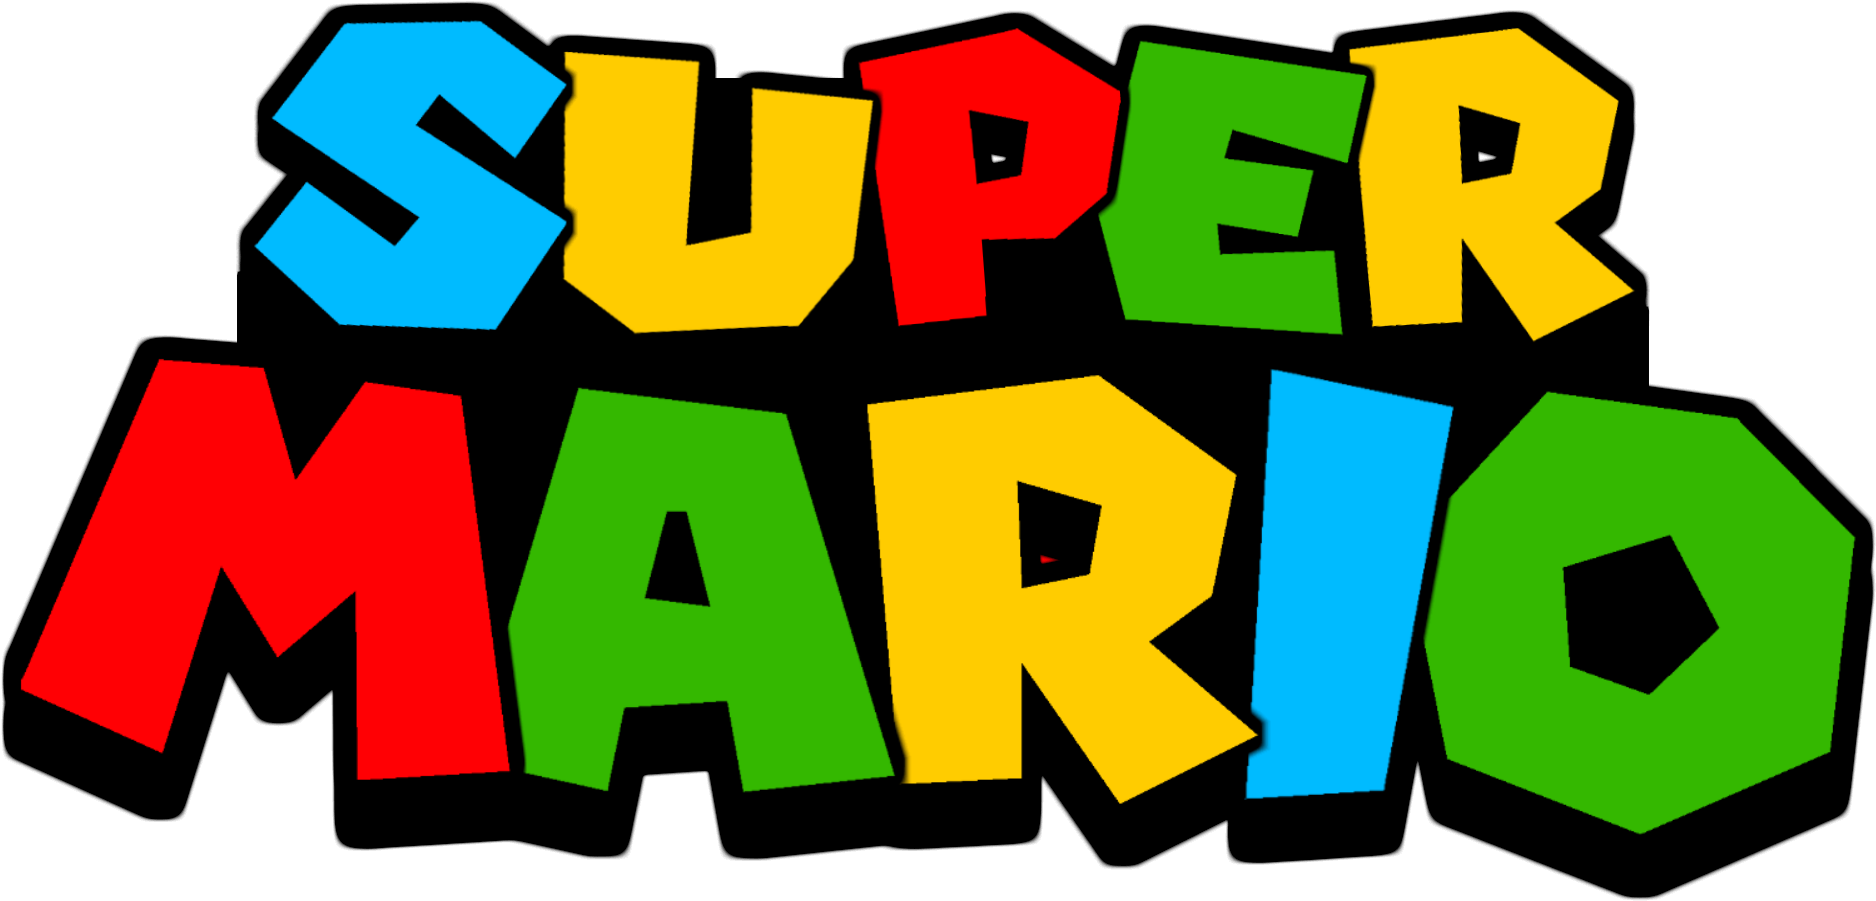 Just Made Mario Logo From Scratch - Super Mario Tacdex Card Game (1920x1080)